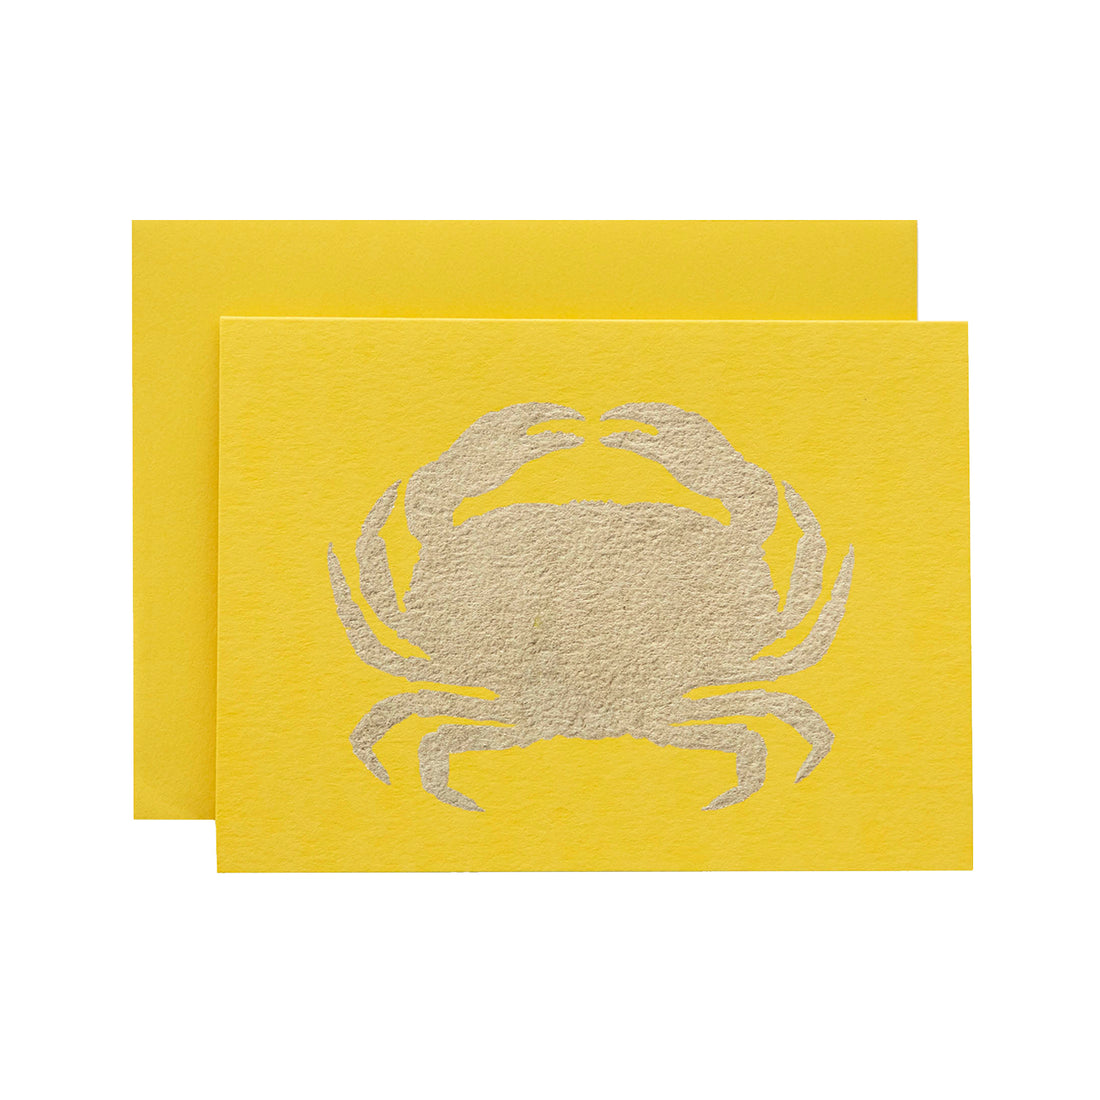 A yellow card featuring the silhouette of a crab in solid gold leaf.